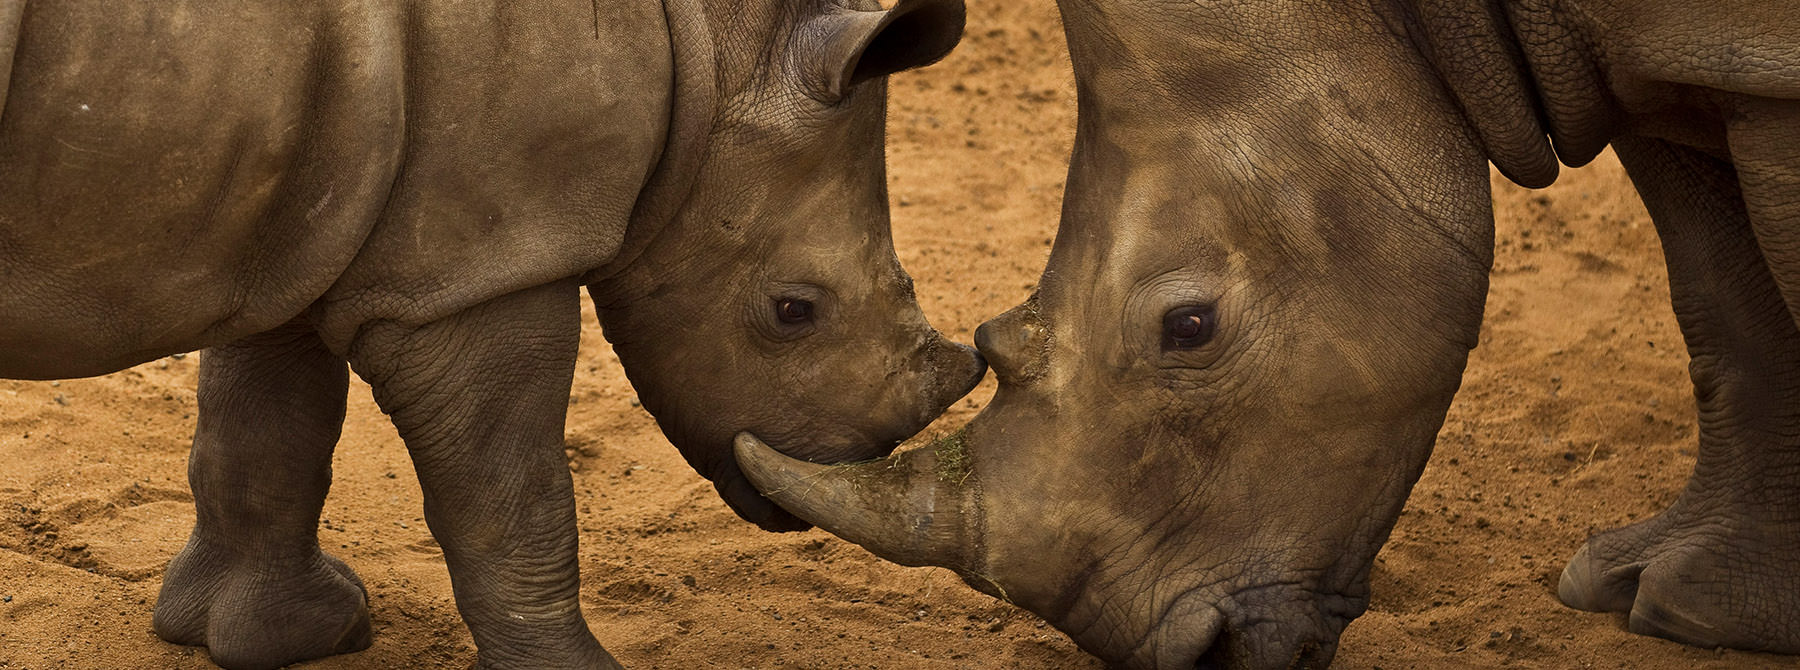 White Rhino and her calf, South Africa © Brent Stirton / Getty Images / WWF-UK